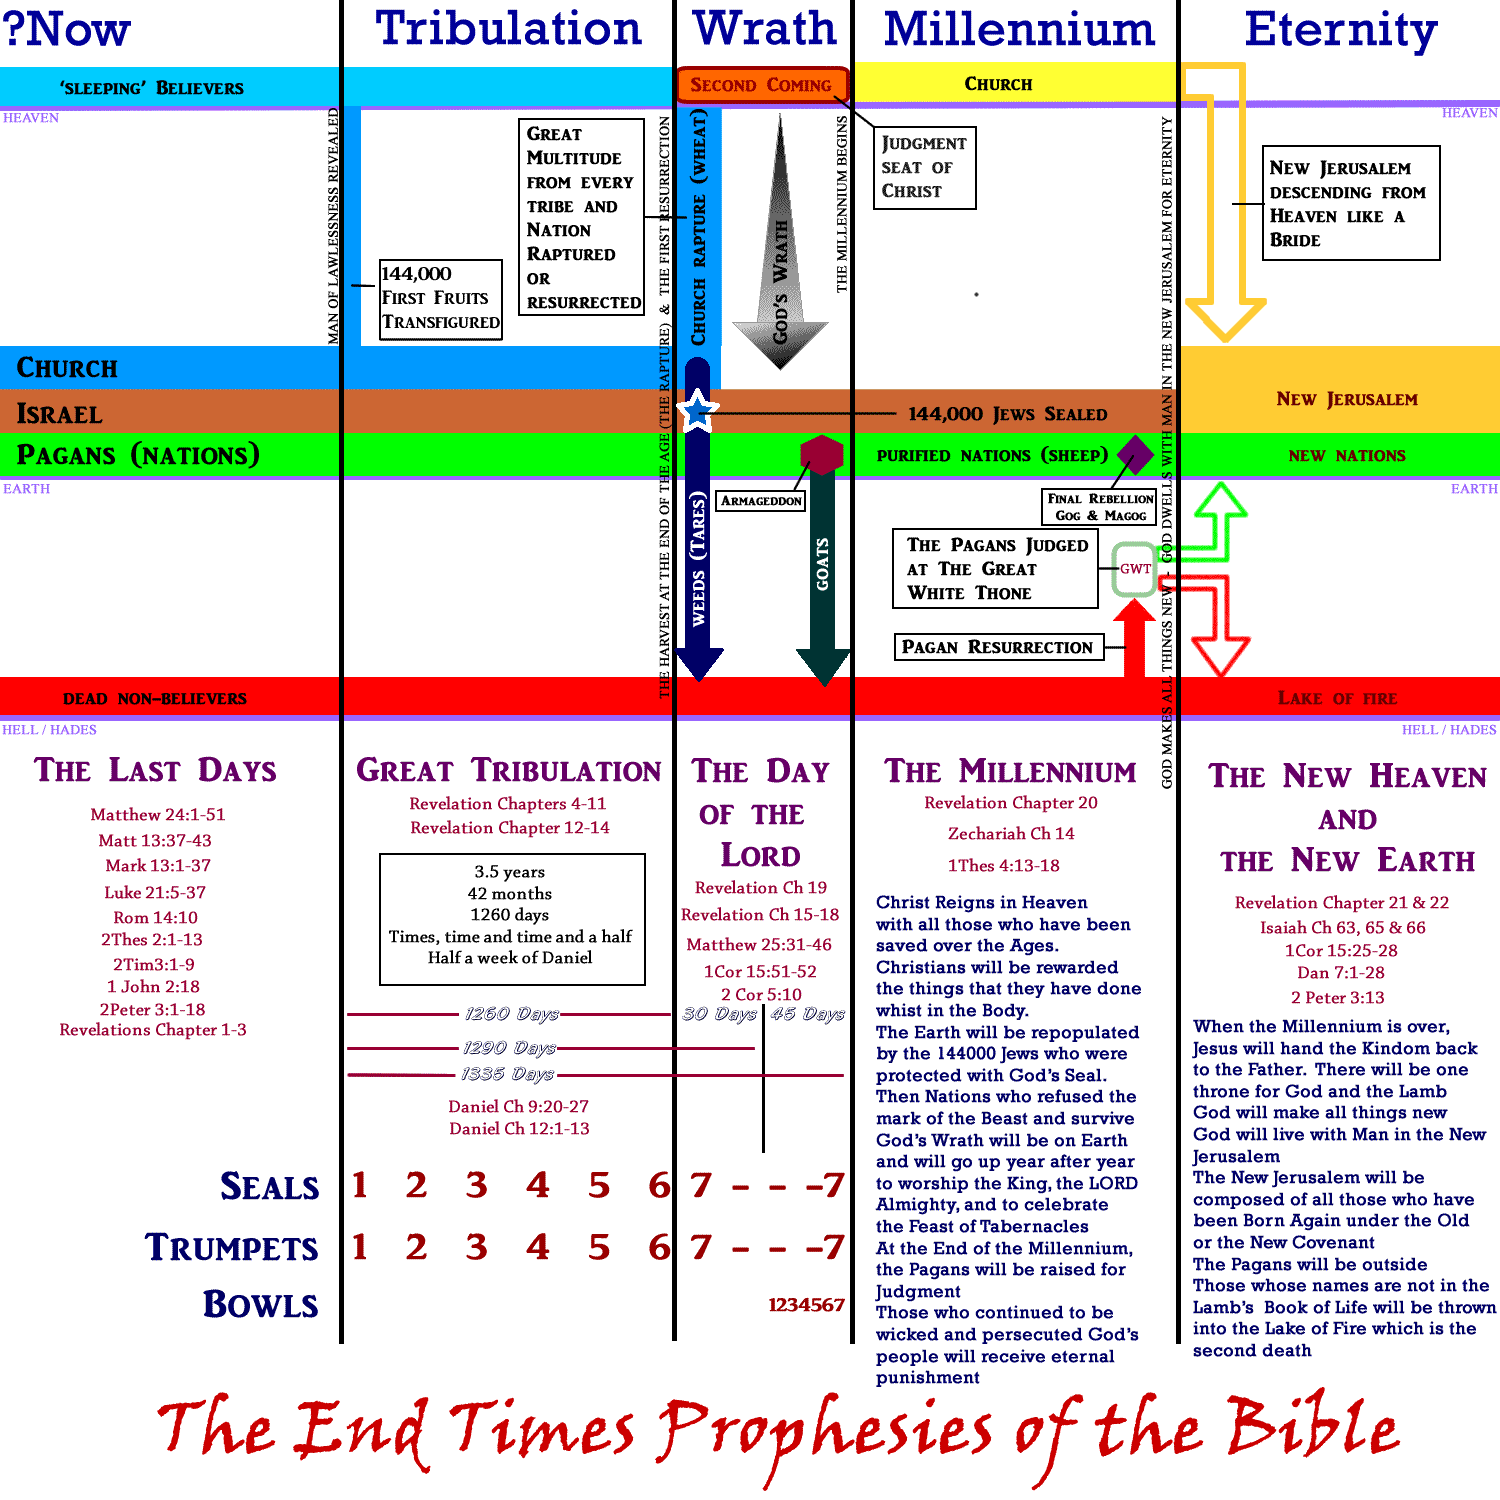 the pagan rapture, judgment of unbelievers, nations, gentiles, great white throne, last rebellion of satan, millennium, 1000 years, eternity, great tribulation